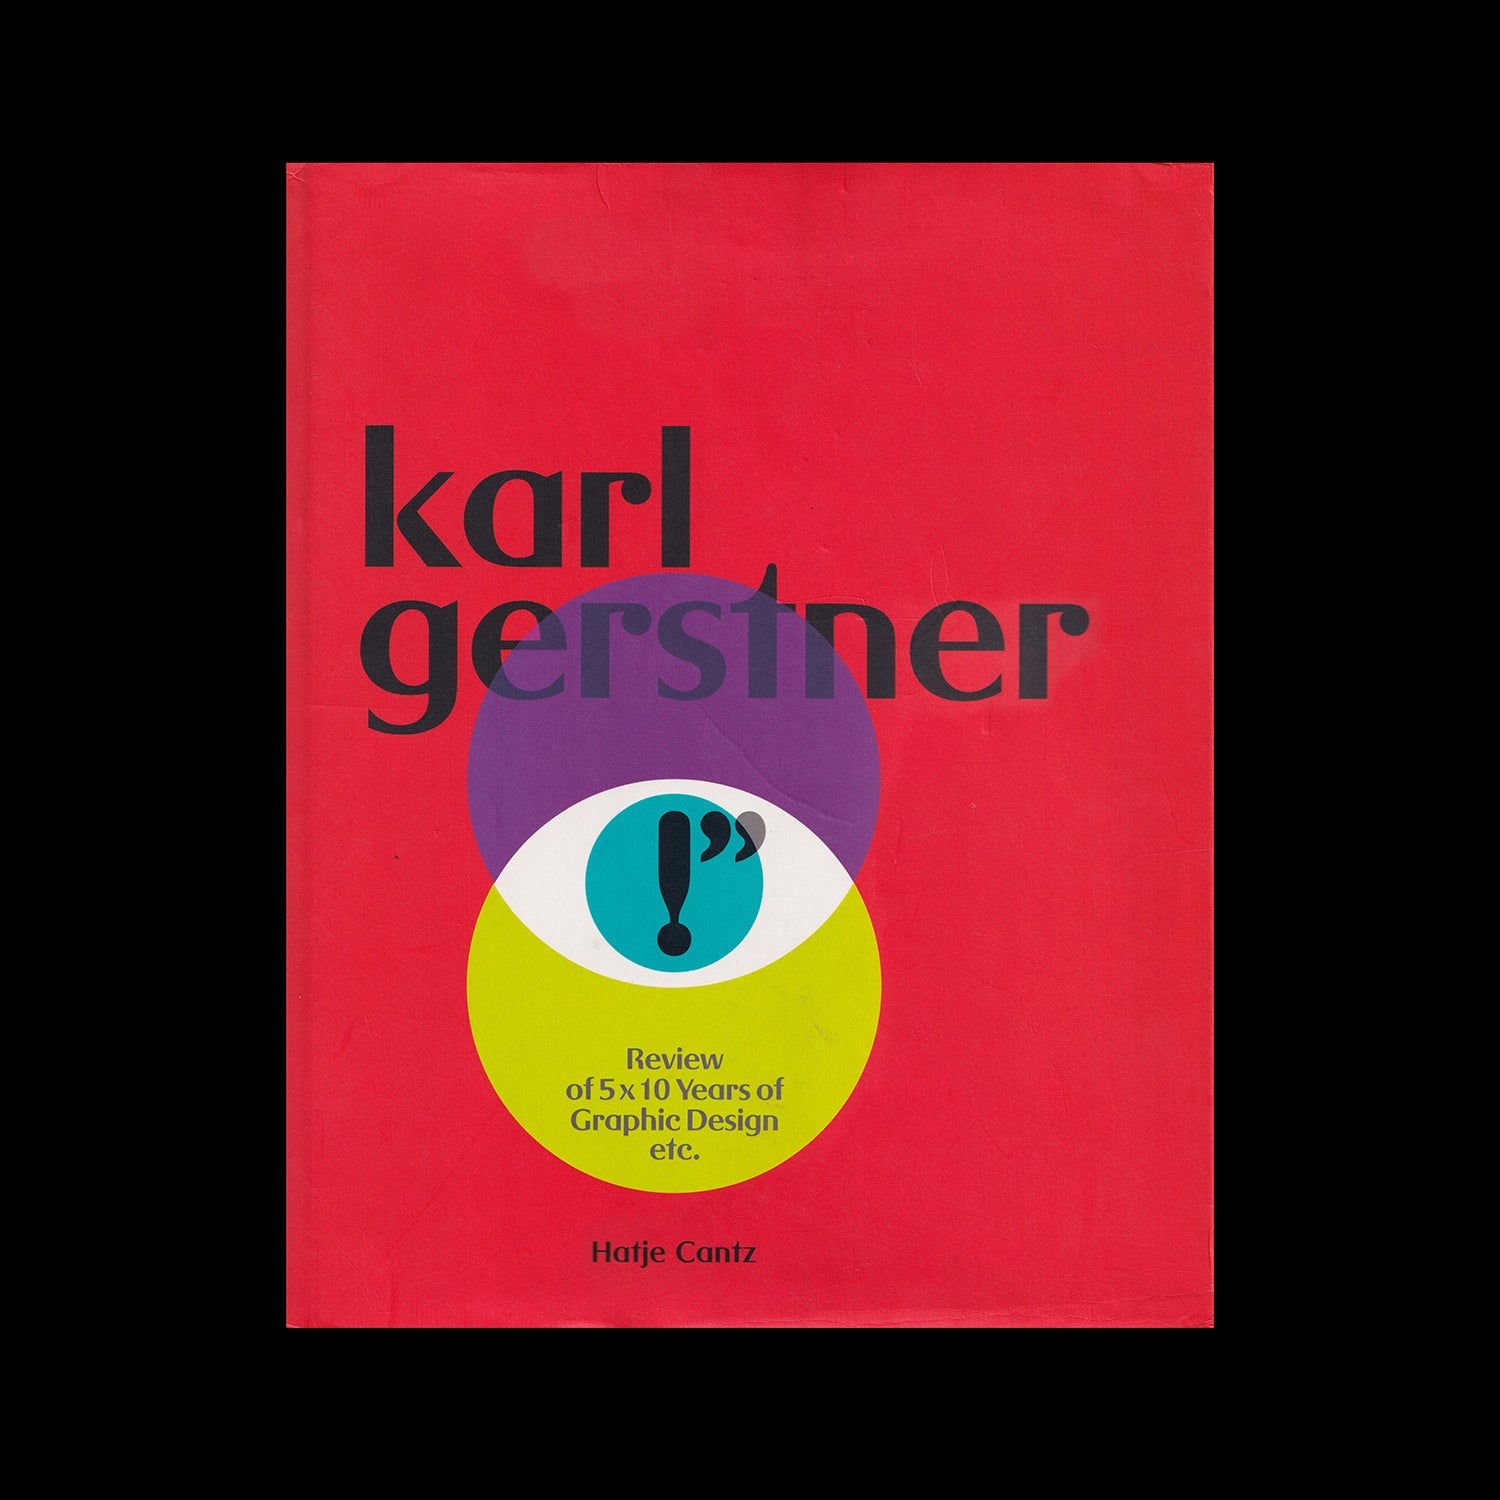 Review of 5x10 Years of Graphic Design by Karl Gerstner